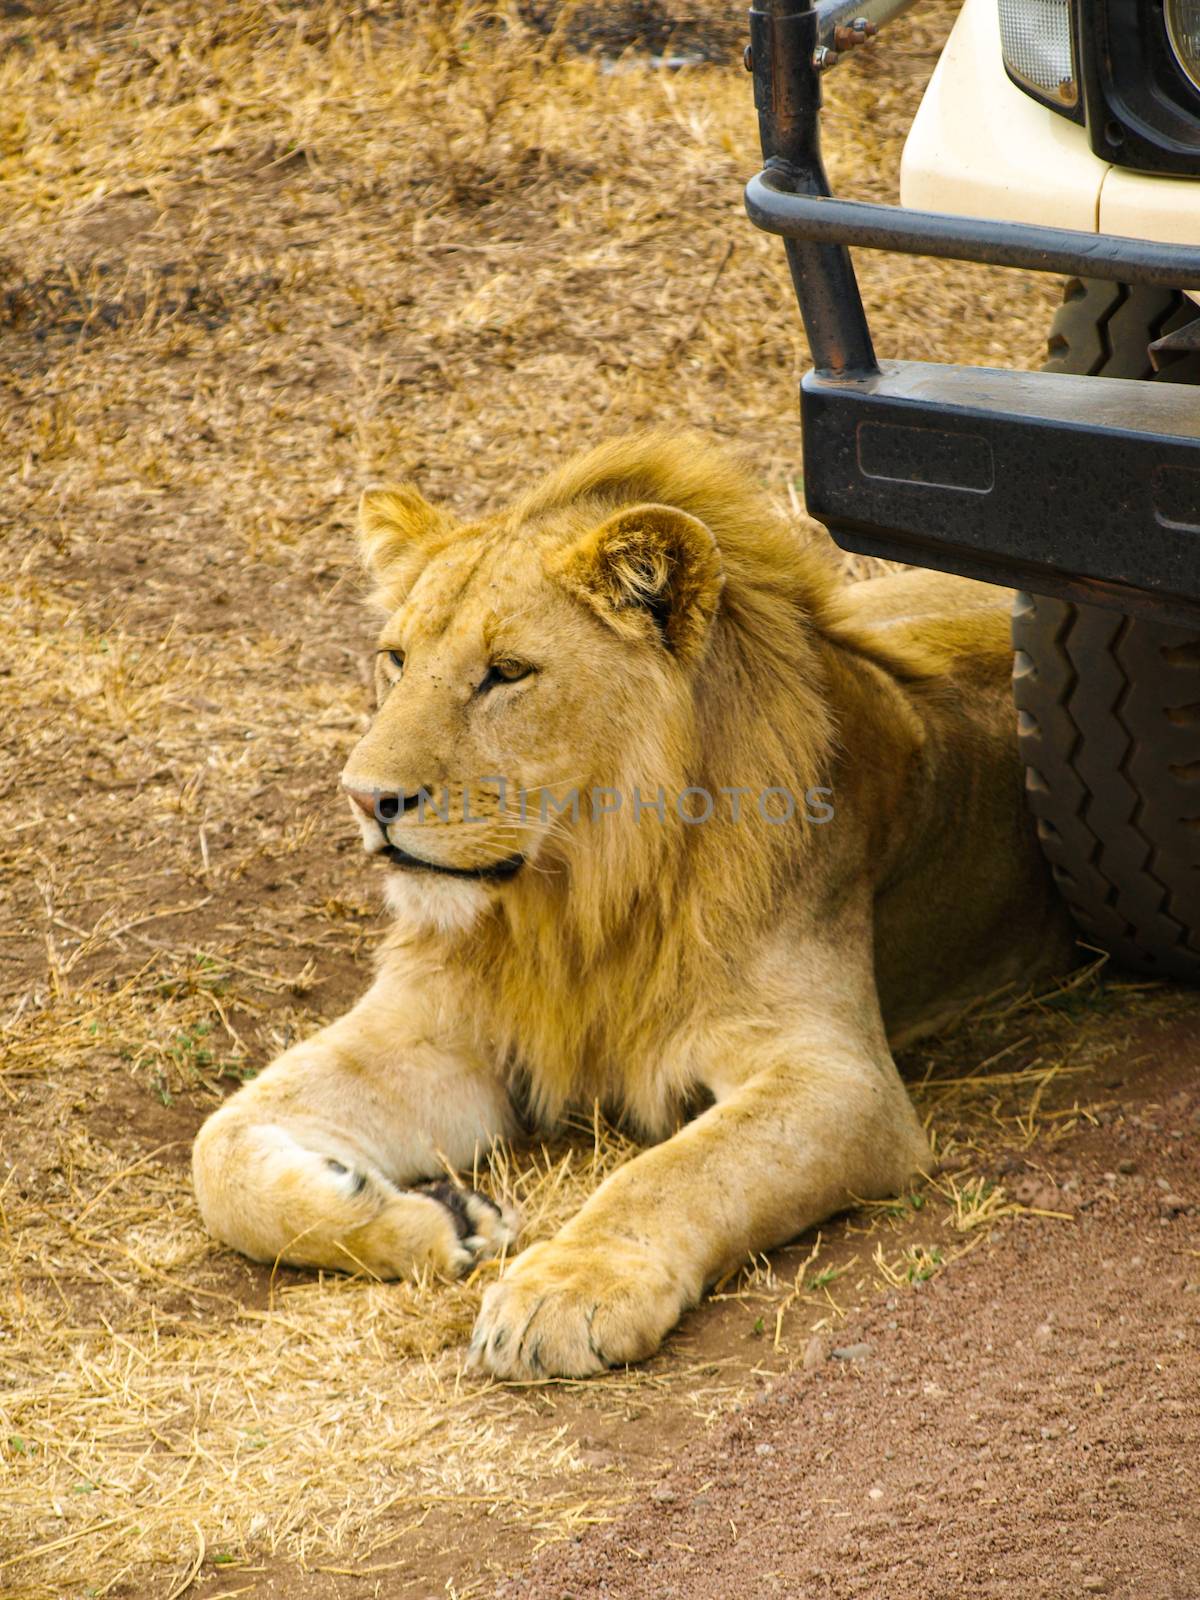 Lion lying in front of the jeep as a guard